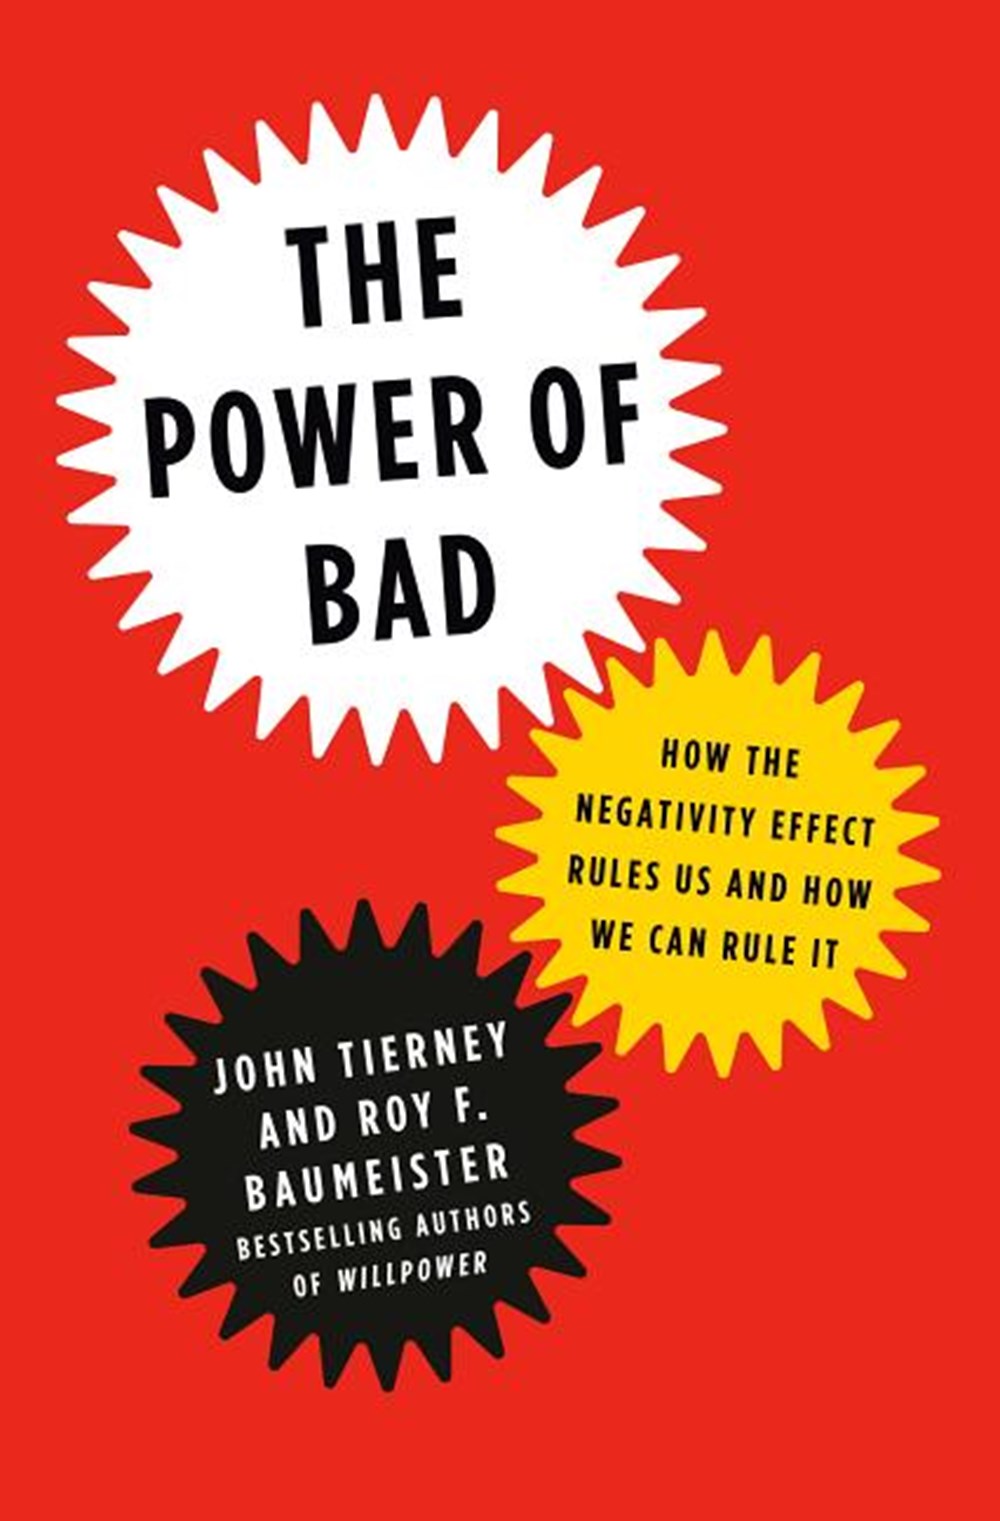 Power of Bad: How the Negativity Effect Rules Us and How We Can Rule It